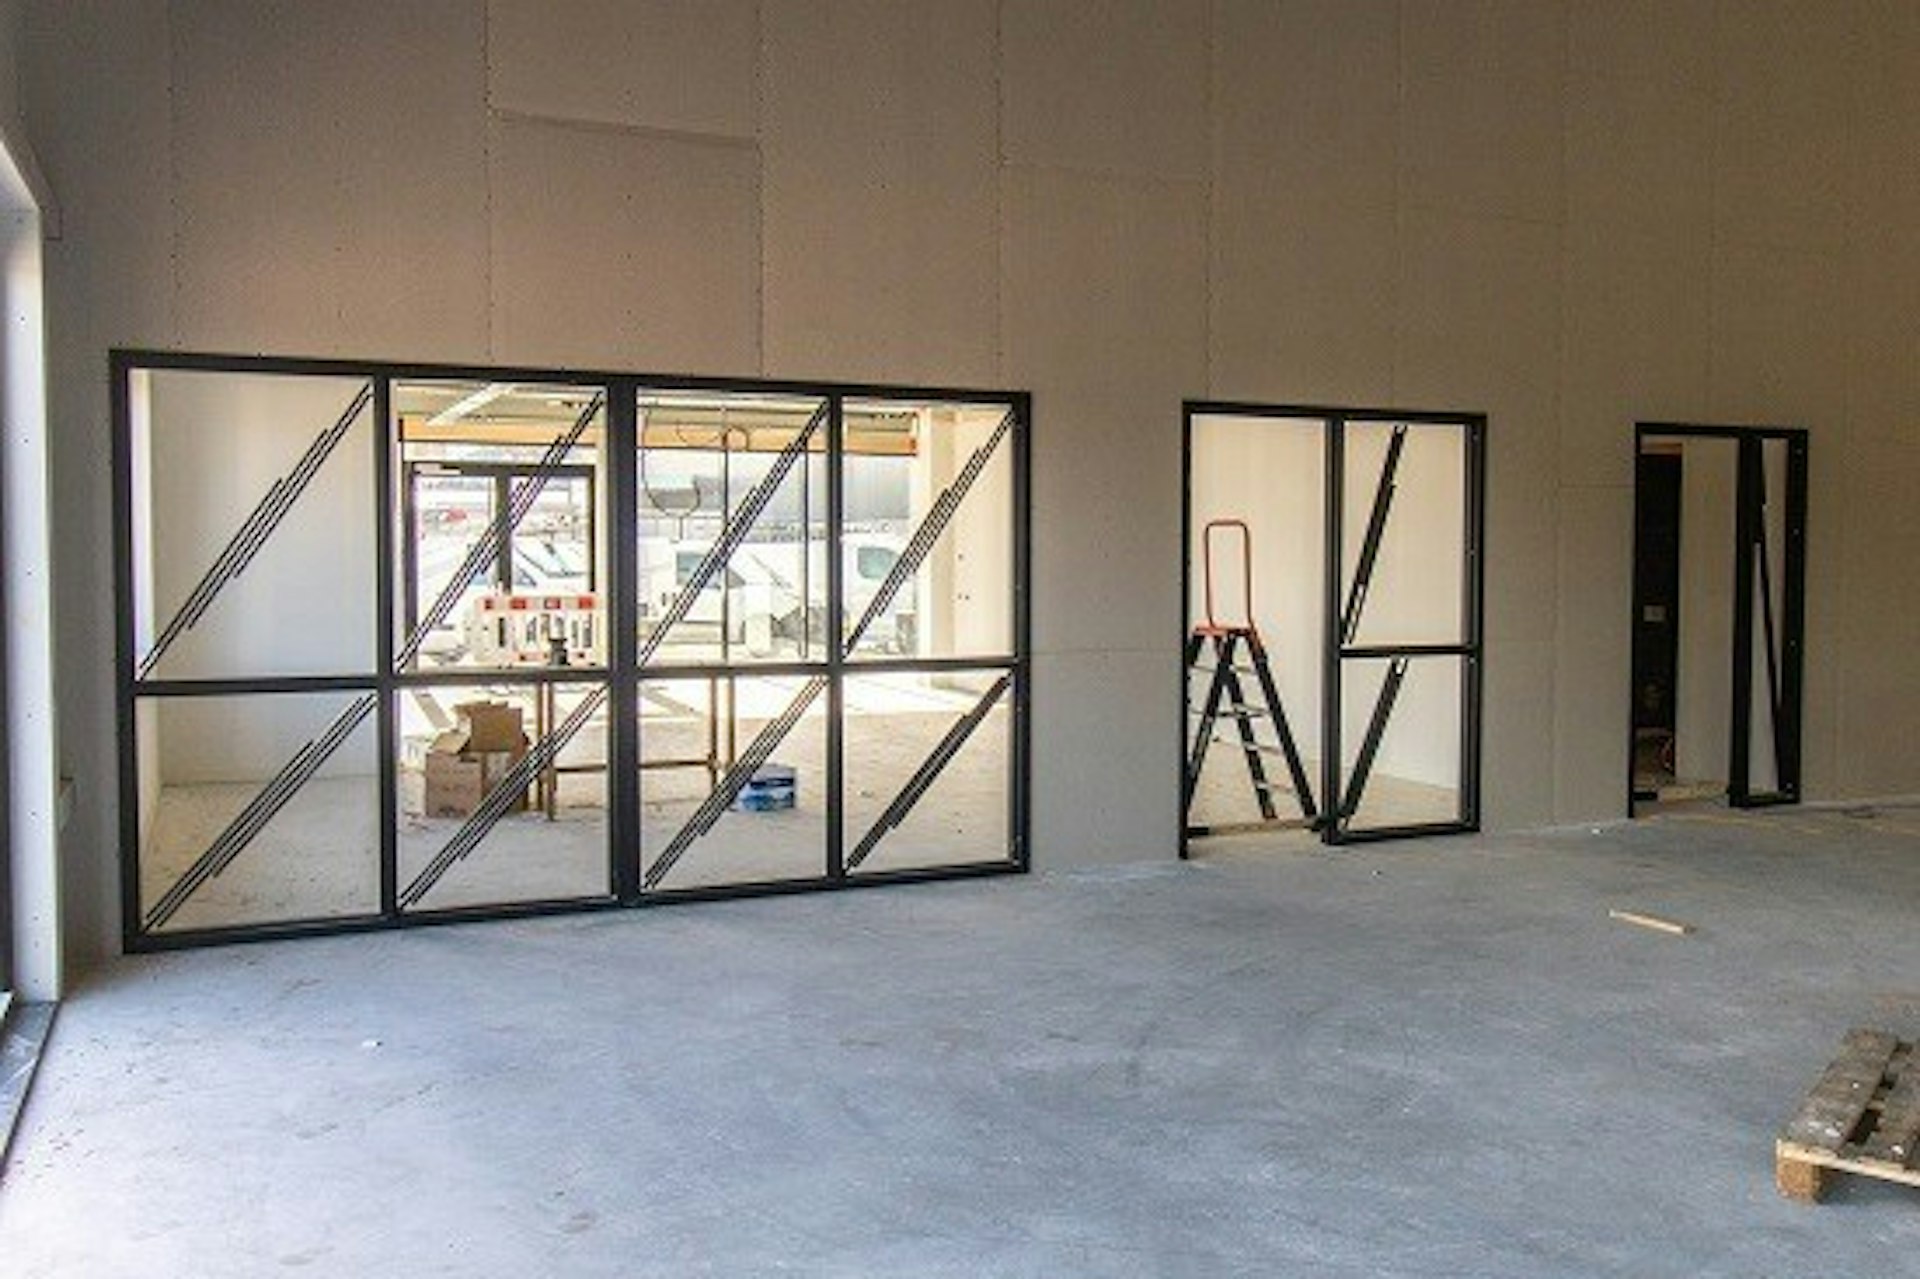 The interior frames and windows are placed in the new hall Van Raam